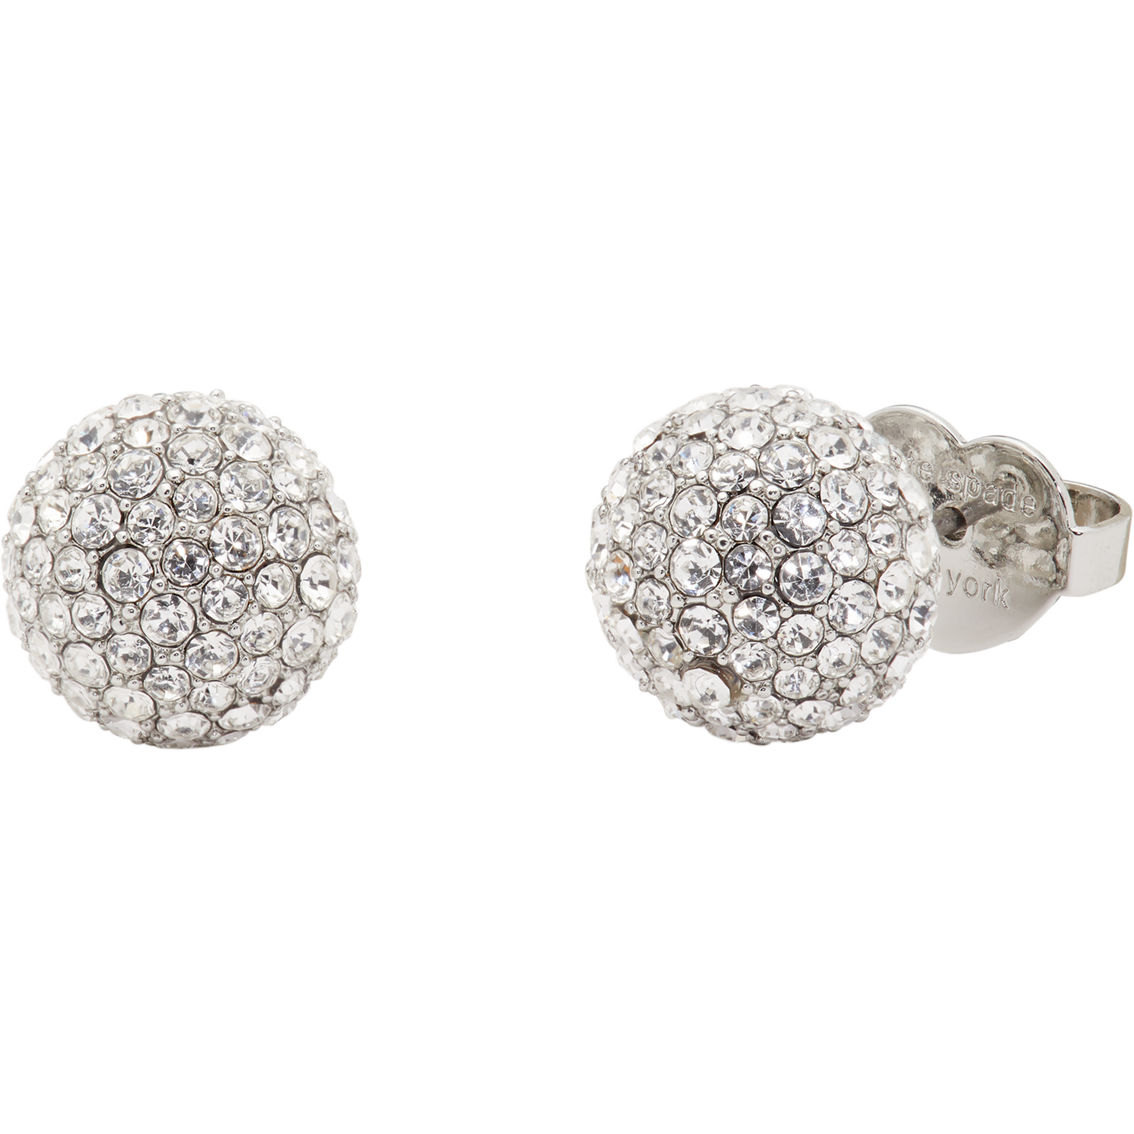 Kate Spade New York Beaming Bright Pave Stud Earrings | Fashion ...